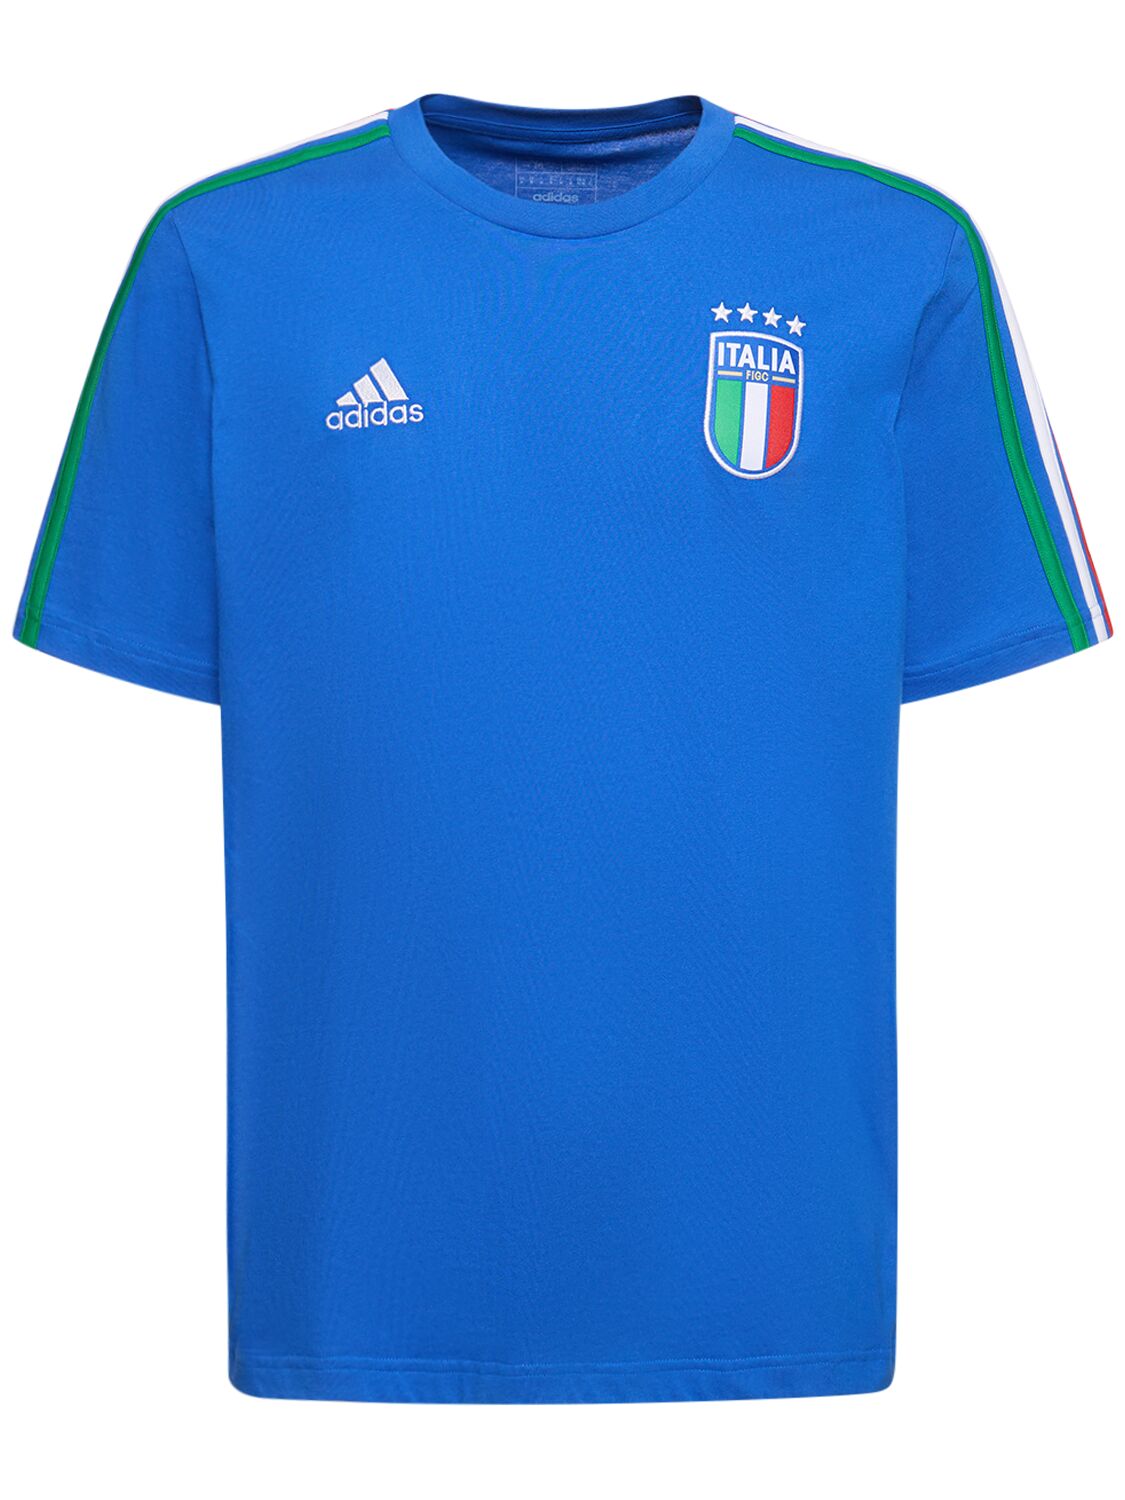 Image of Italy T-shirt